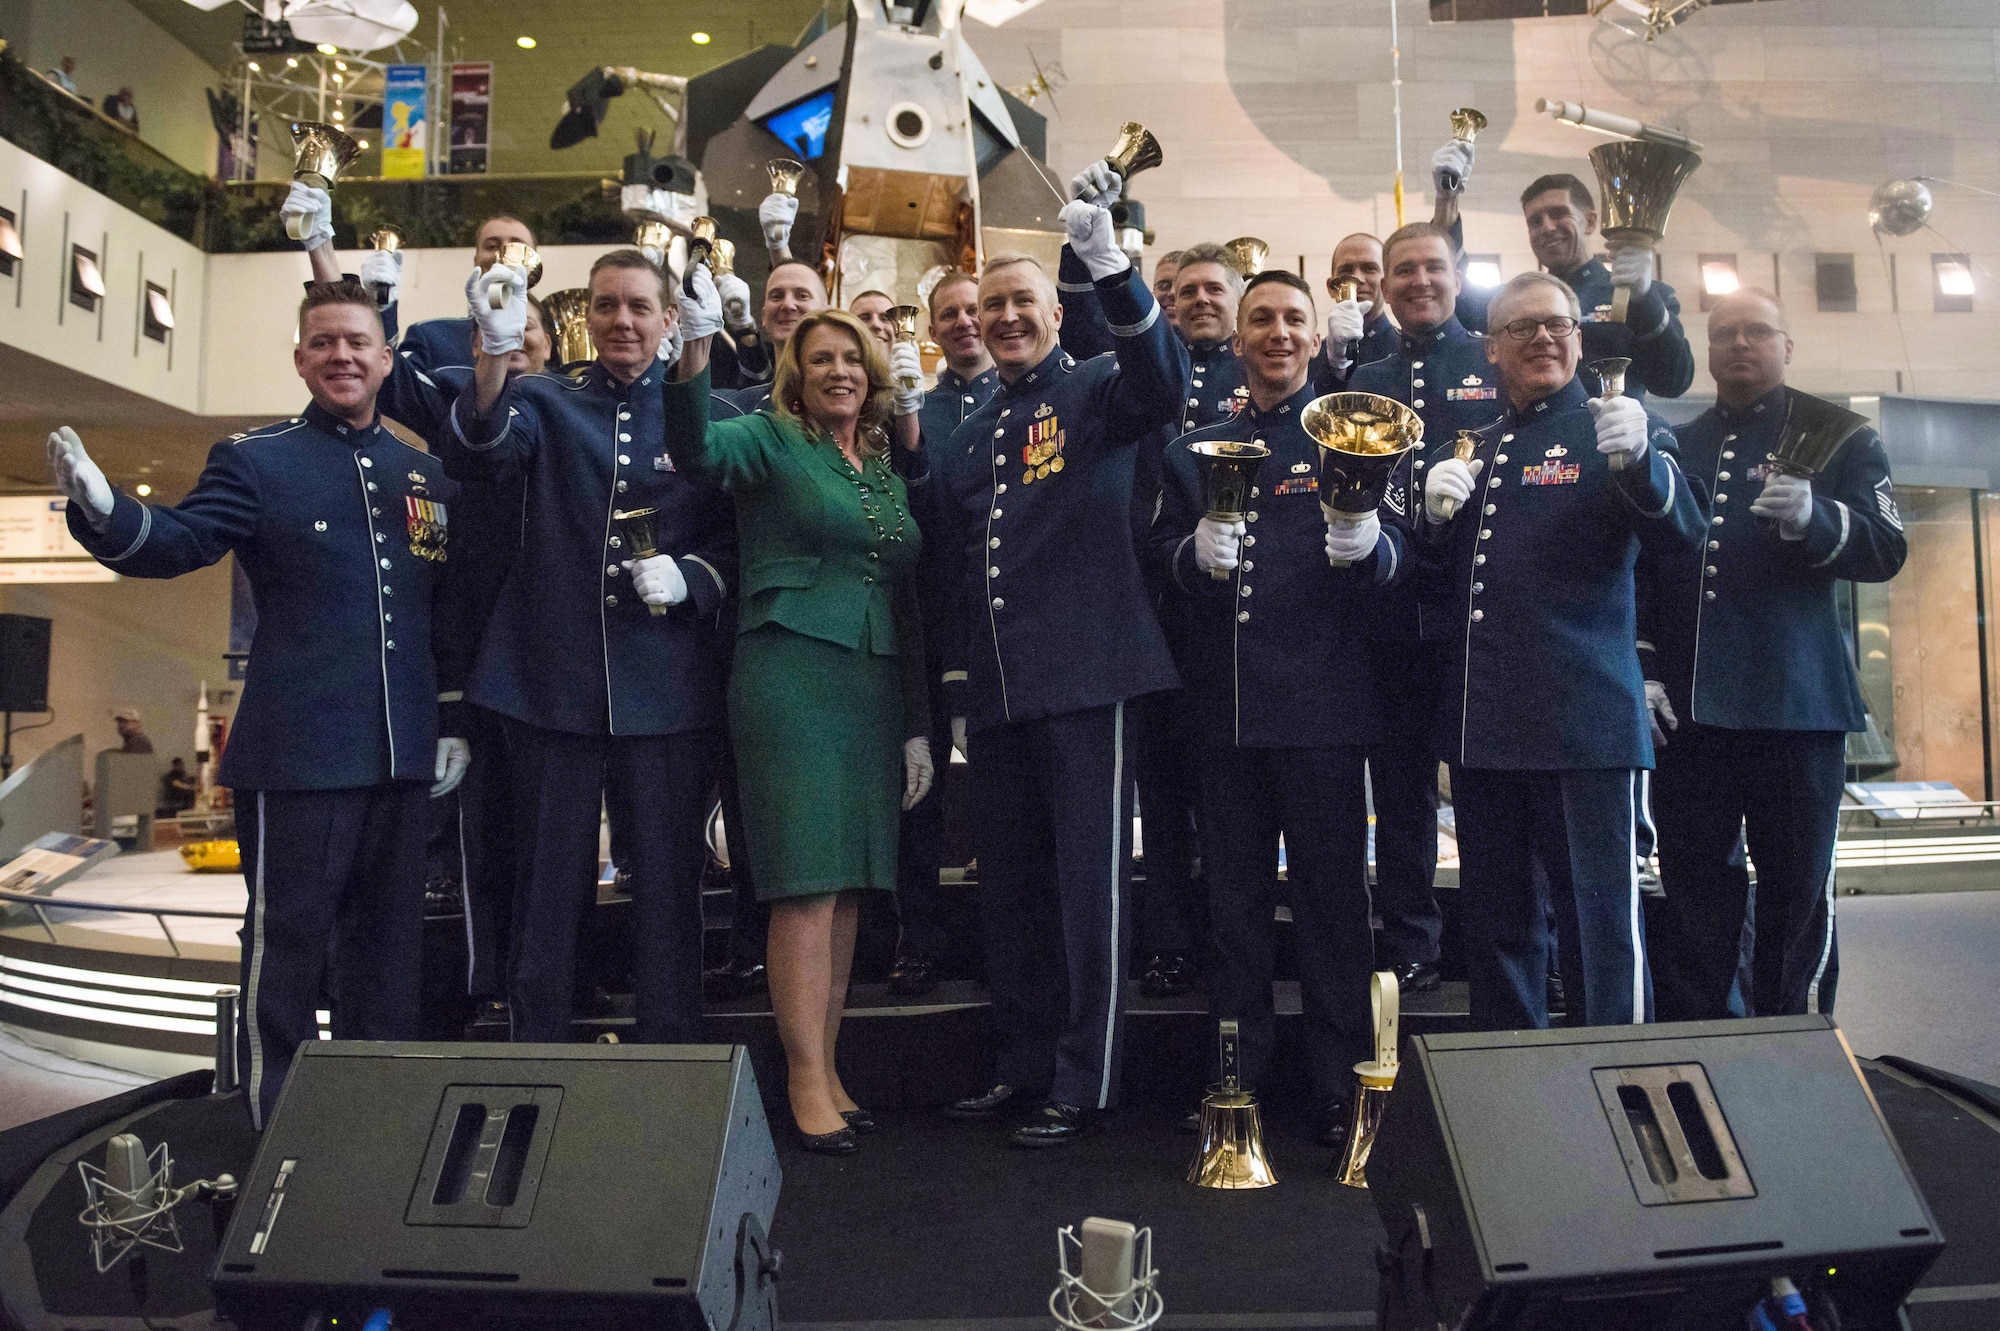 Secretary of the Air Force Deborah Lee James poses for a photo with members of the U.S. Air Force band after participating in a flash mob at the Smithsonian National Air and Space Museum in Washington D.C., with other members of the U.S. Air Force Band and their sister unit the U.S. Air Force Honor Guard, in order to kick off the holiday season by surprising visitors at the Smithsonian's National Air and Space Museum with a flash mob experience Nov. 29, 2016  (U.S. Air Force photo by Senior Master Sgt. Adrian Cadiz)(Released)